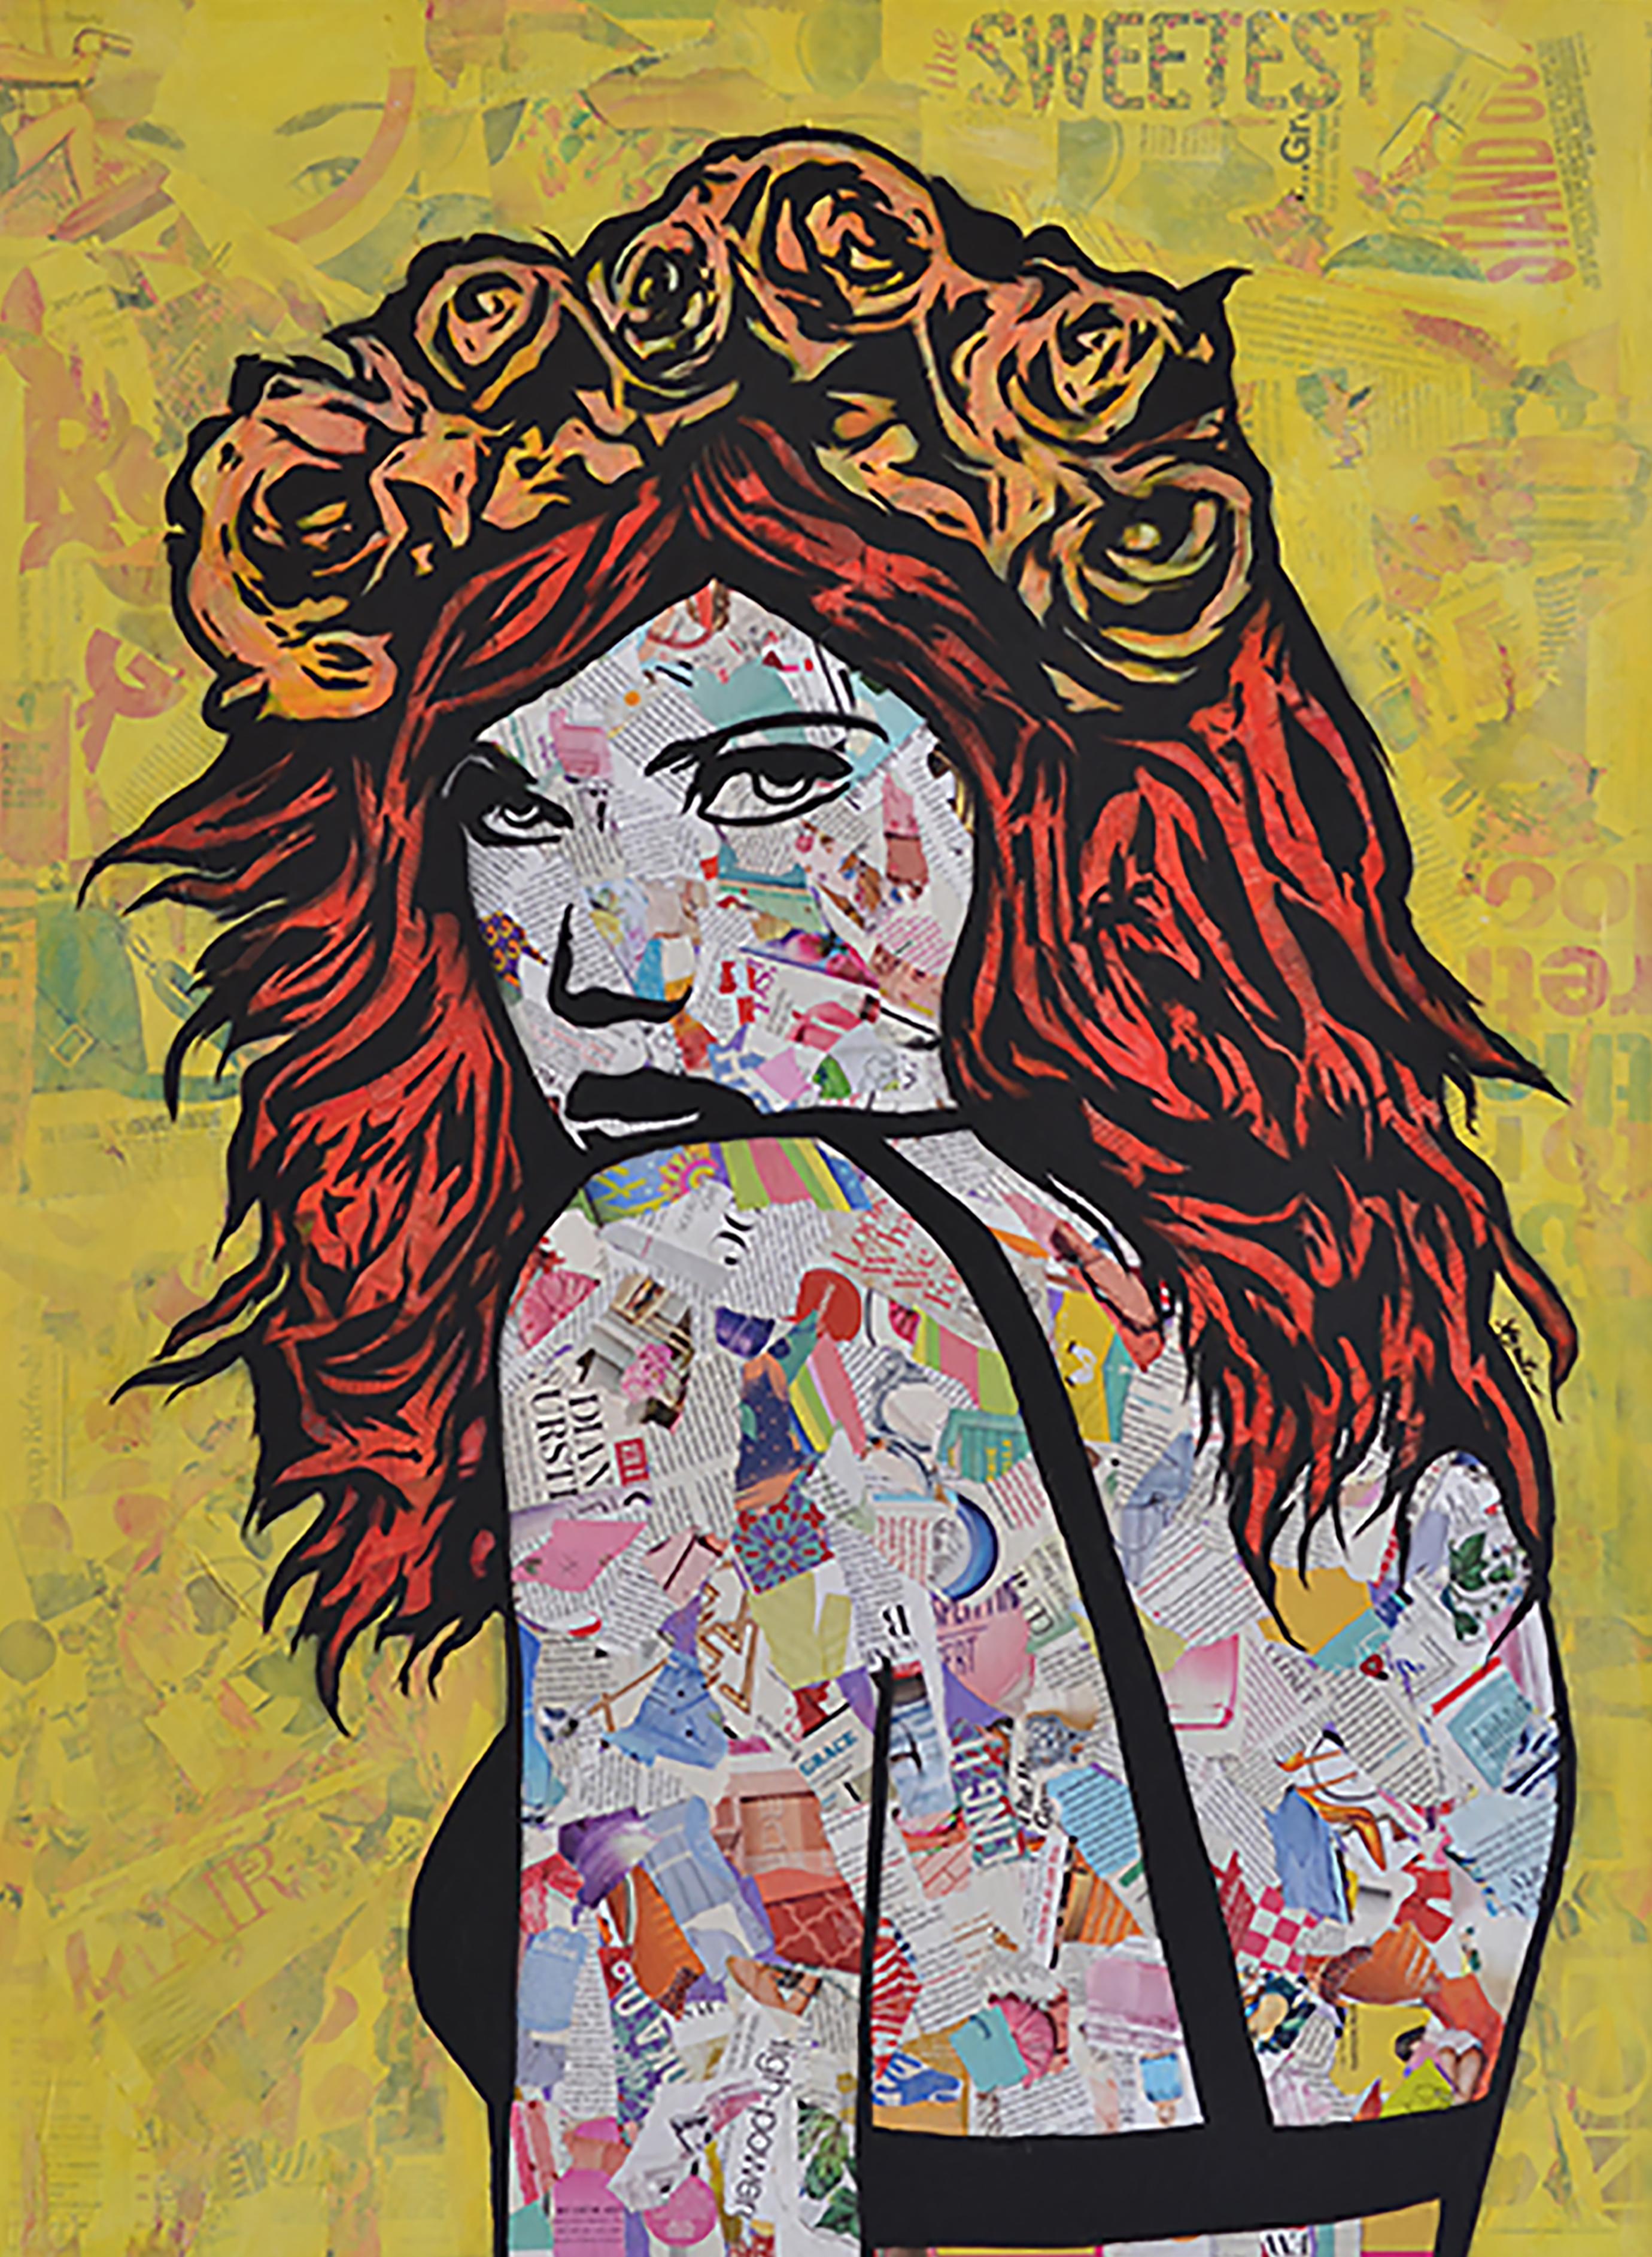 "Em on Fire"-Magazine Collage, Acrylic & Spray Paint on Canvas - Mixed Media Art by Amy Smith